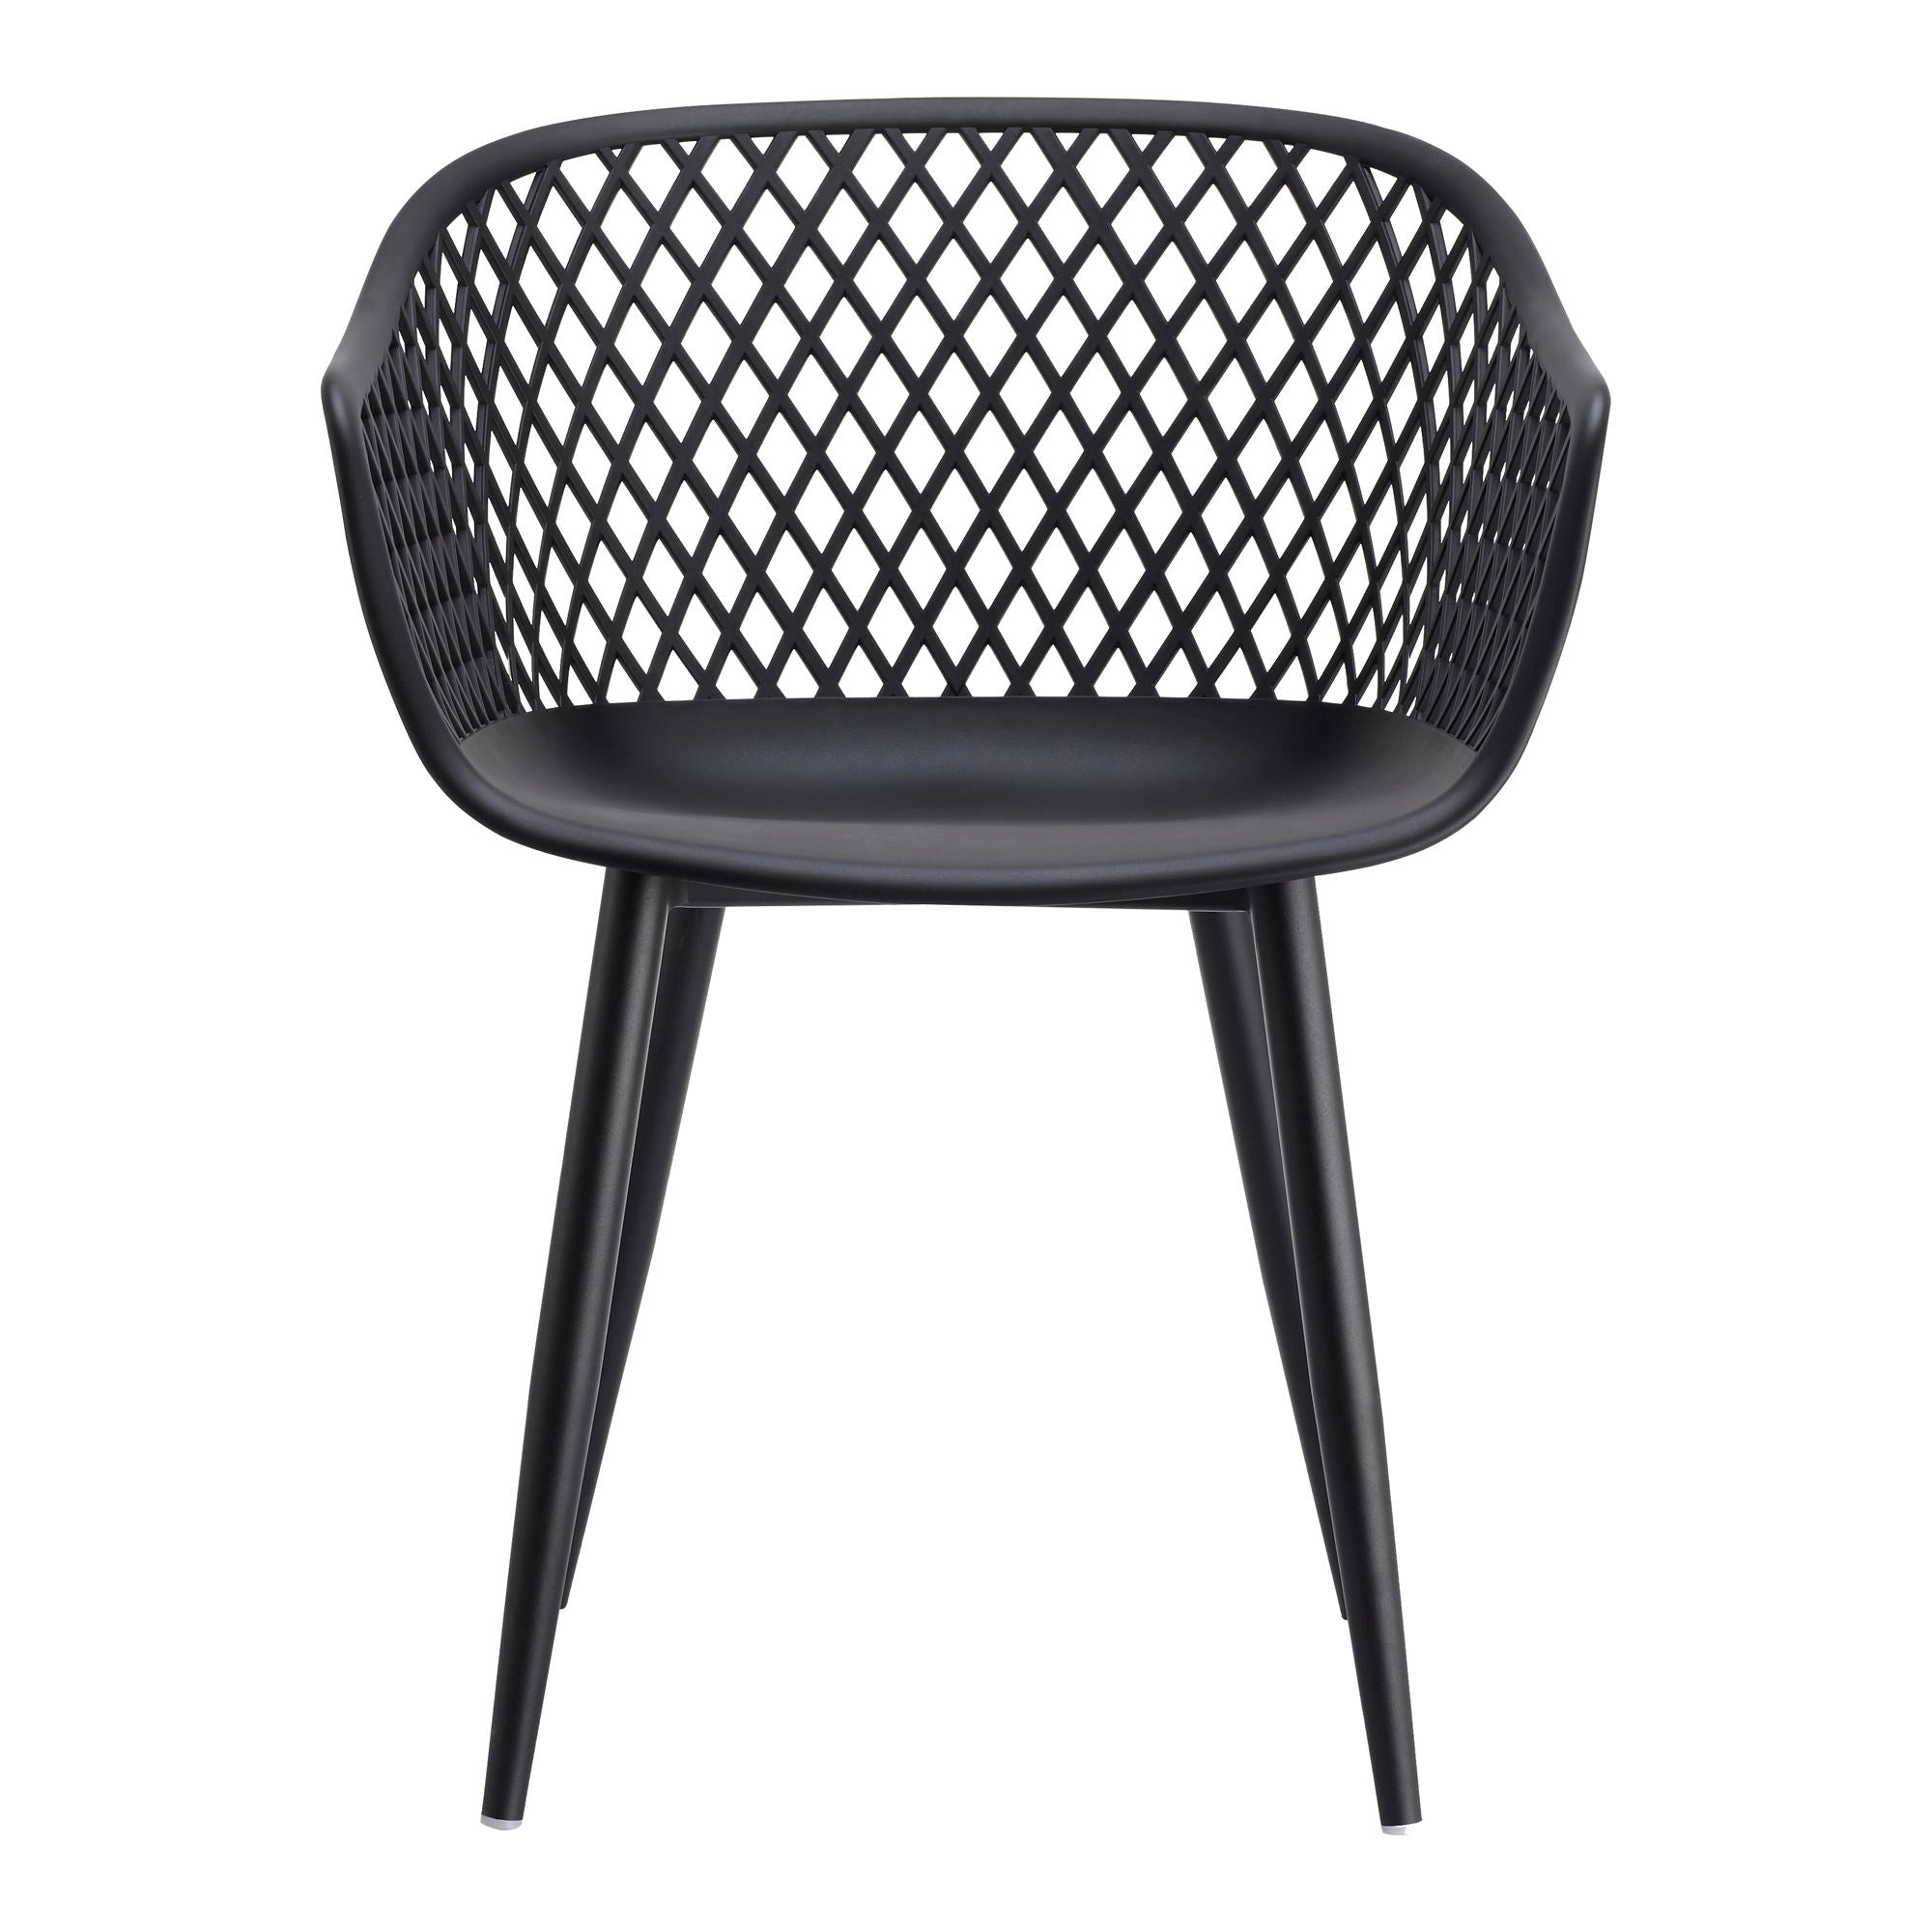 Piazza - Outdoor Chair - Black - M2